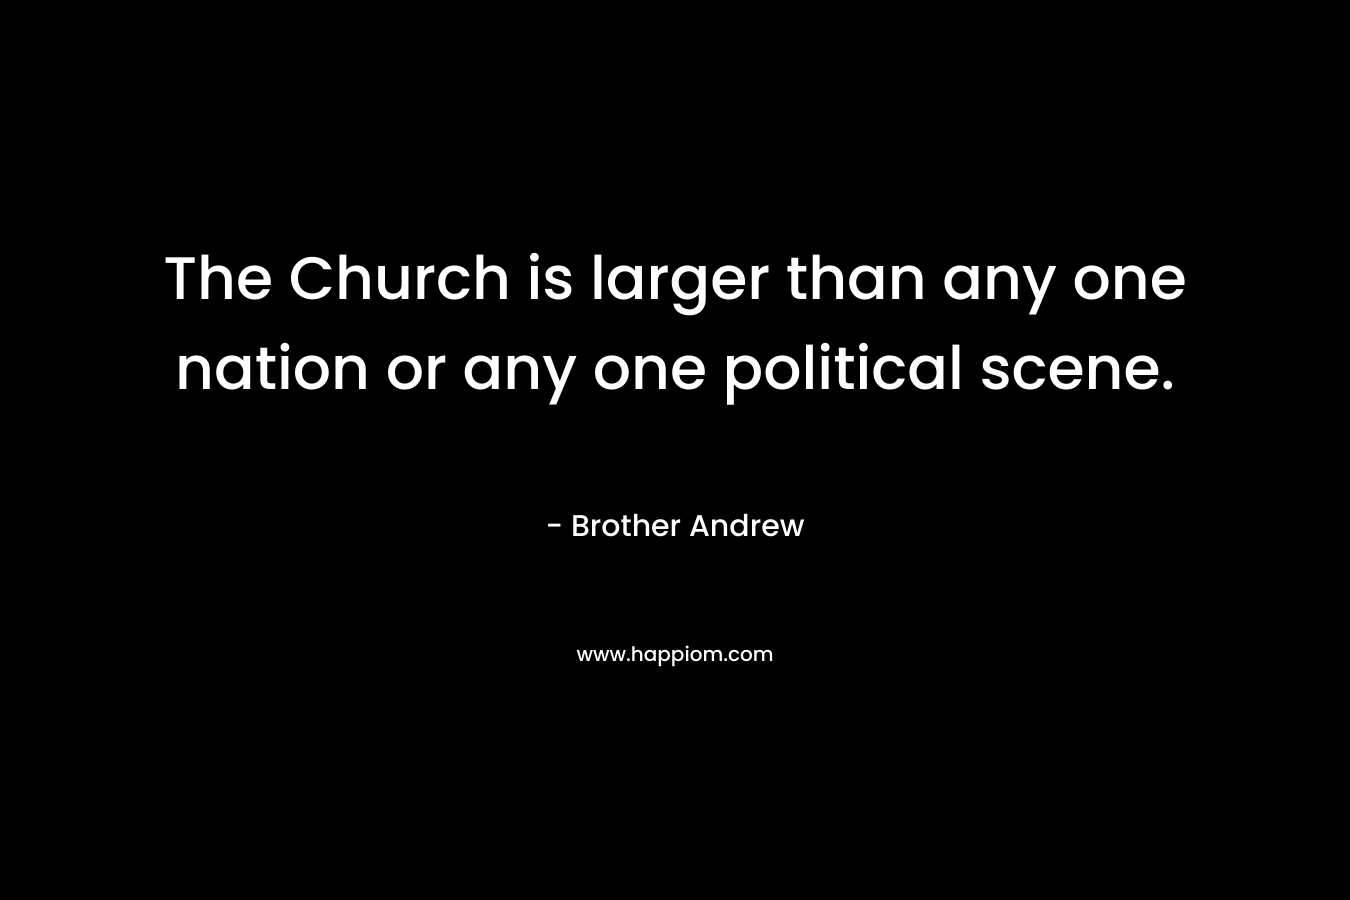 The Church is larger than any one nation or any one political scene.